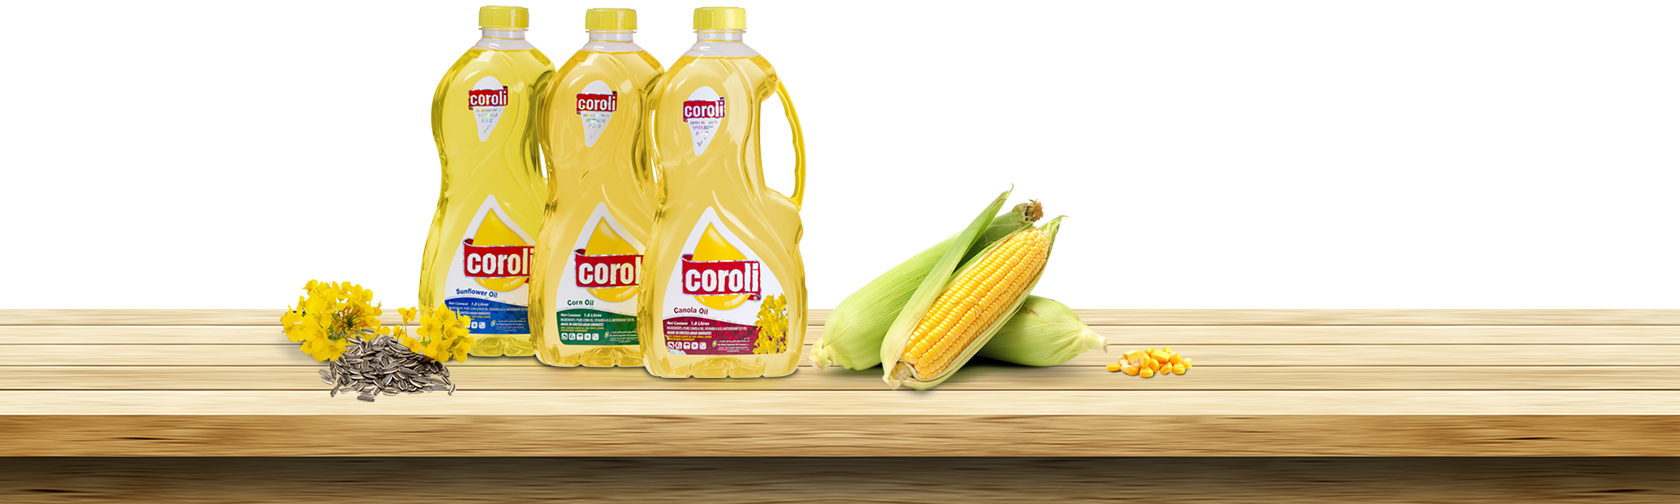 Winning Hearts For Generations - Corn On The Cob (1680x504)